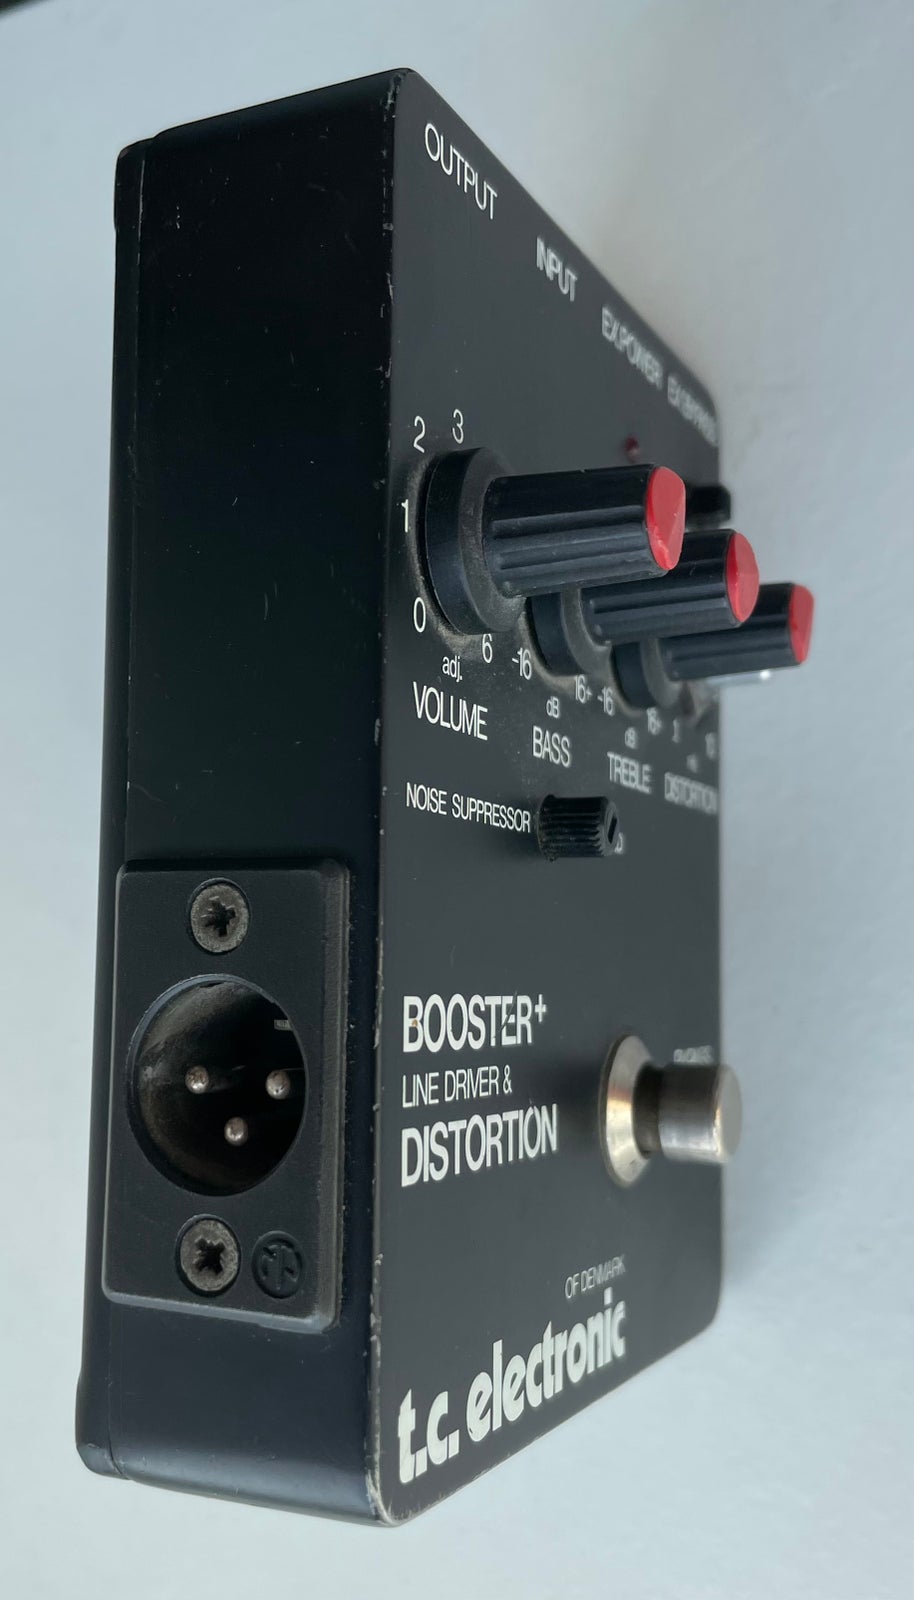 Booster + Line driver & Distortion, TC Electronic